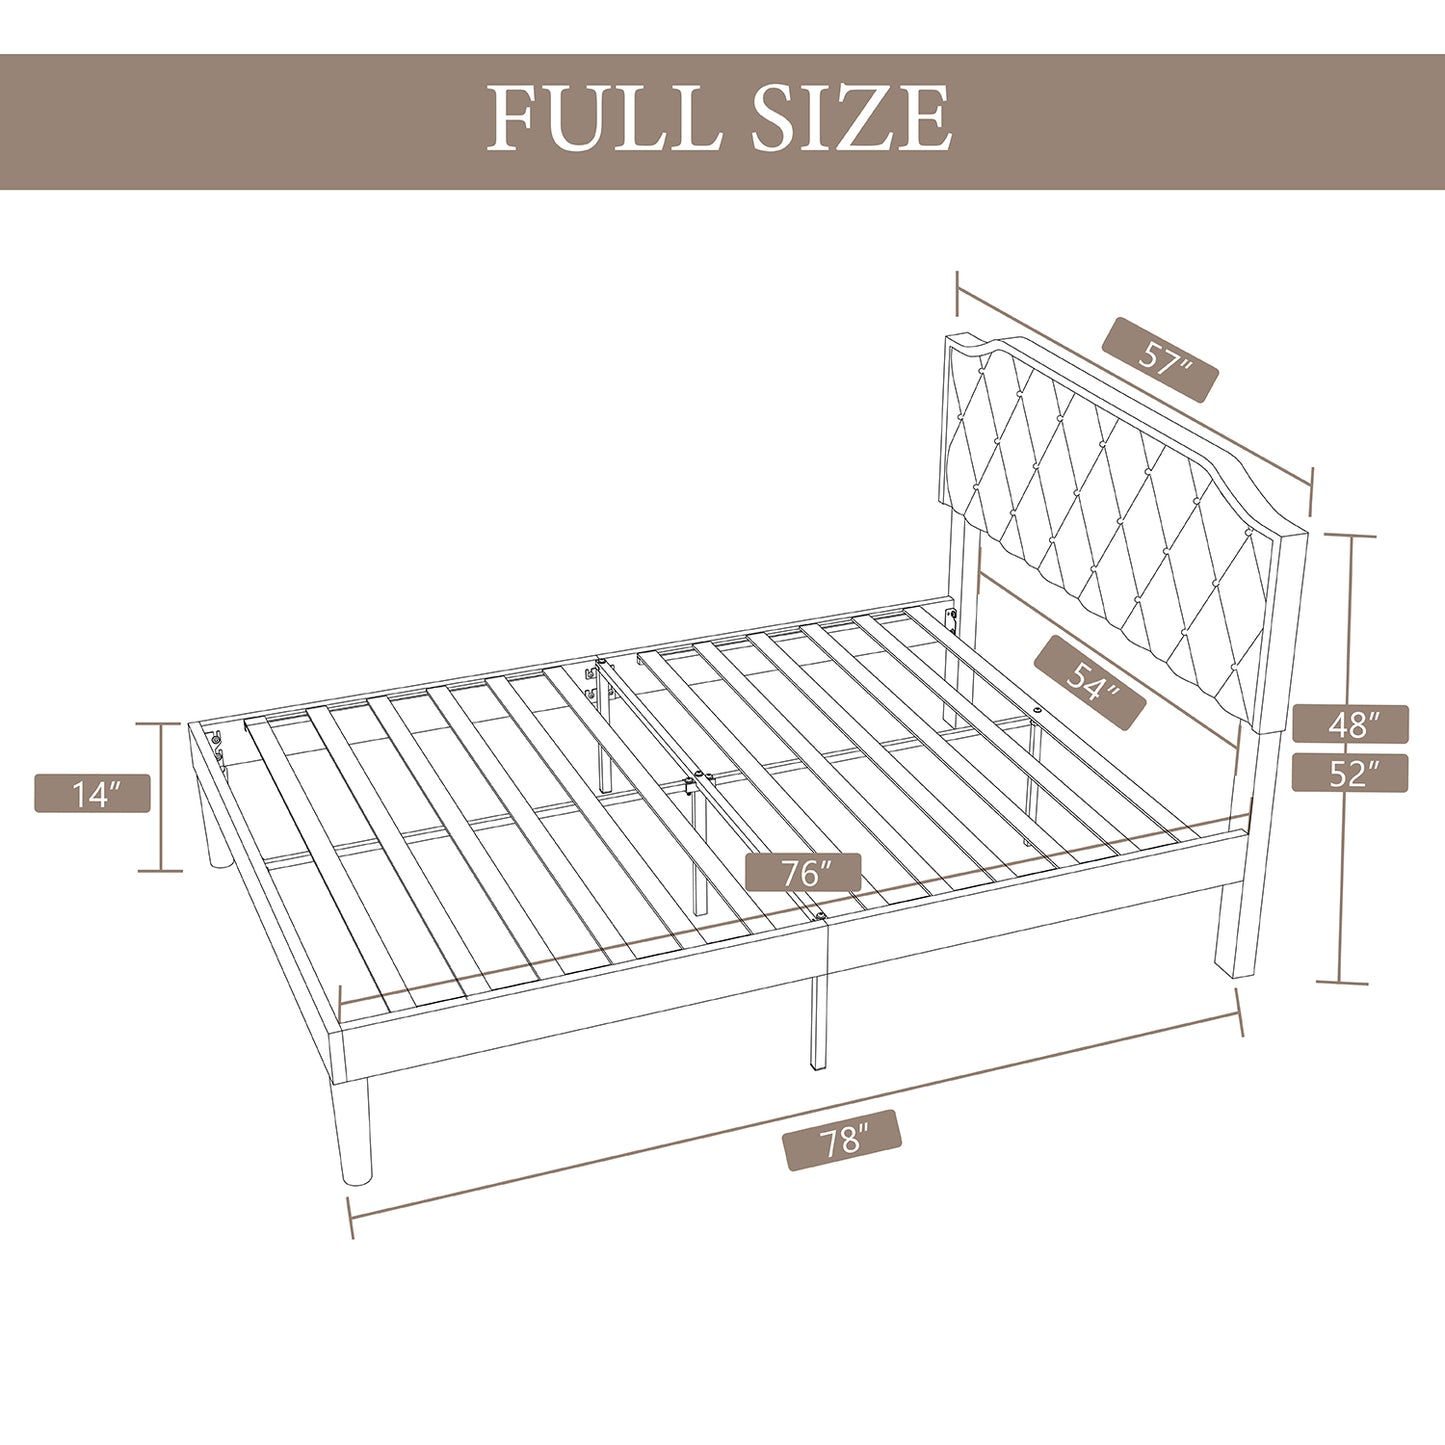 Allewie Upholstered Platform Bed Frame with Diamond Button Tufted Headboard, Sturdy Wood Slat Support